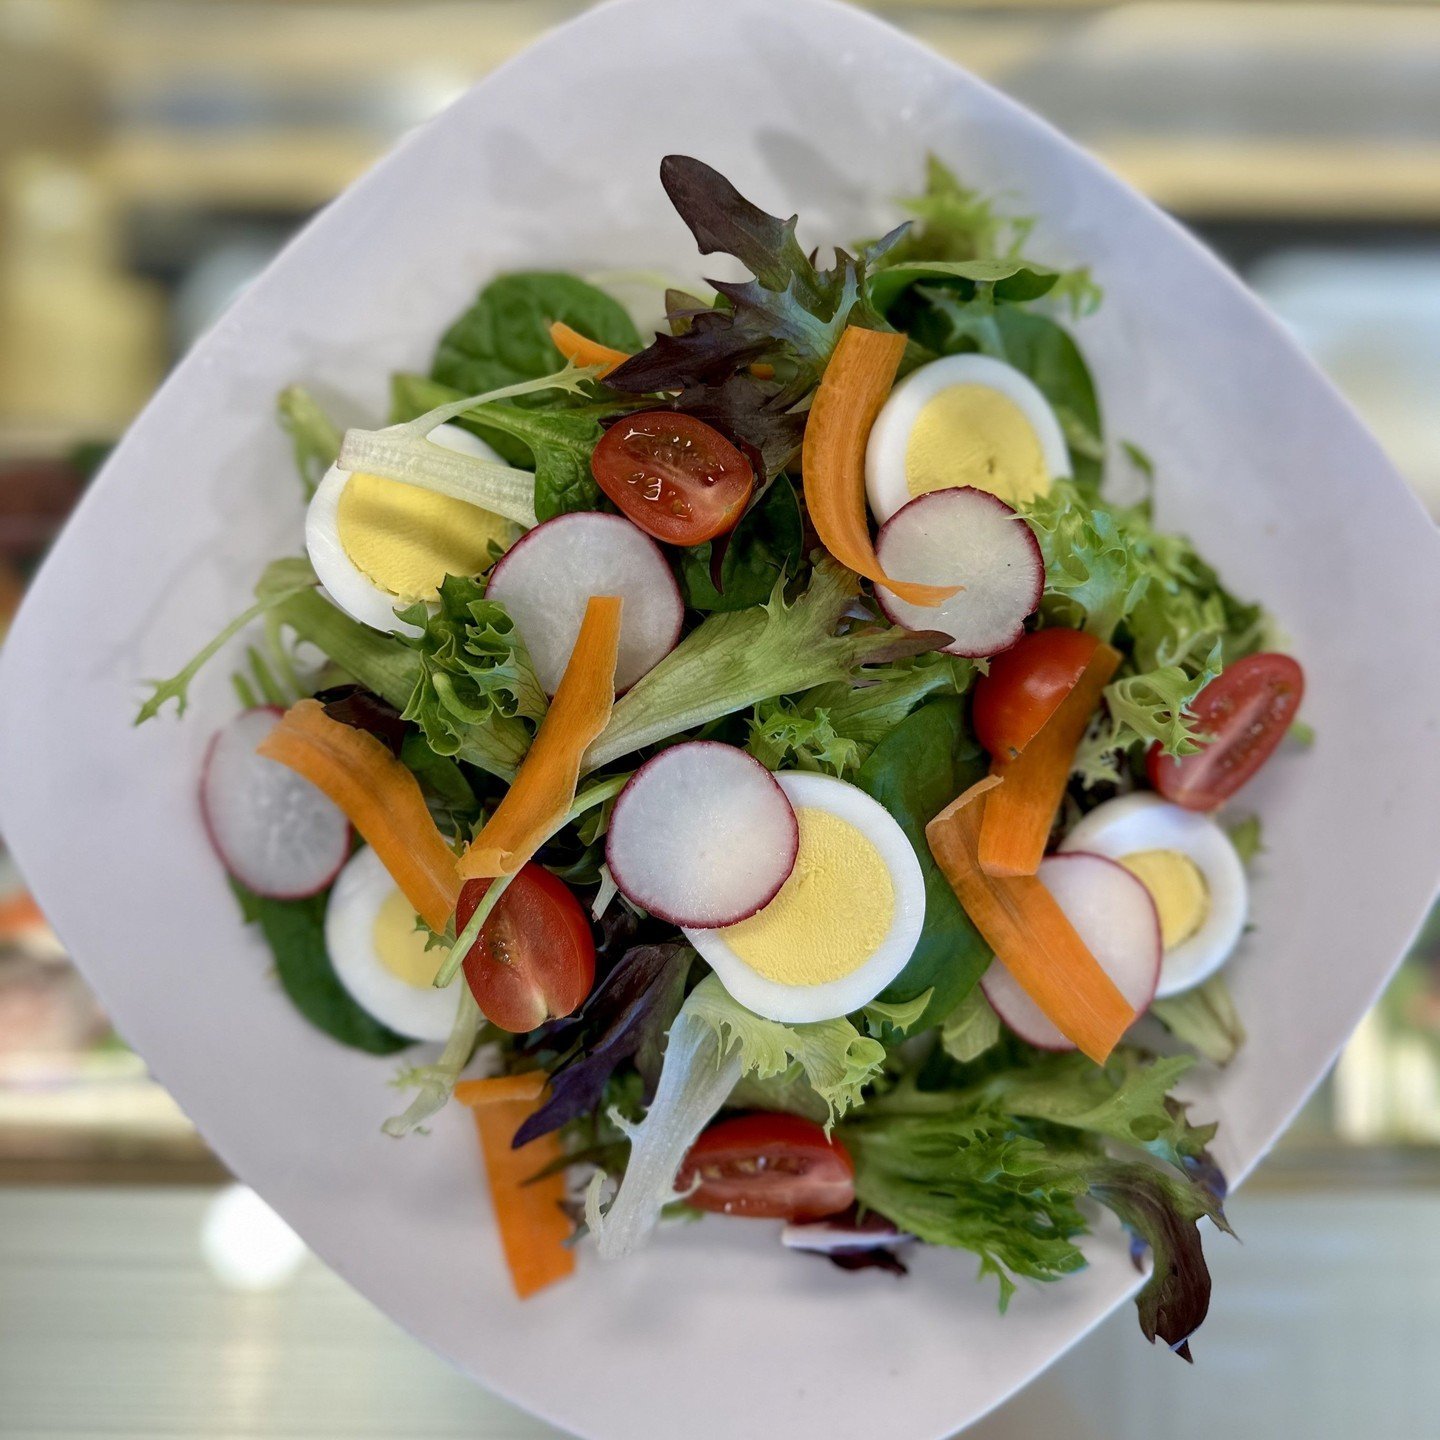 Welcome the new Farmhouse Salad! We pair hard boiled egg, carrot, radish, and tomato with a sherry - tarragon vinaigrette for a delicious, light and refreshing meal. The best part? It goes perfectly with a slice of our quiche!